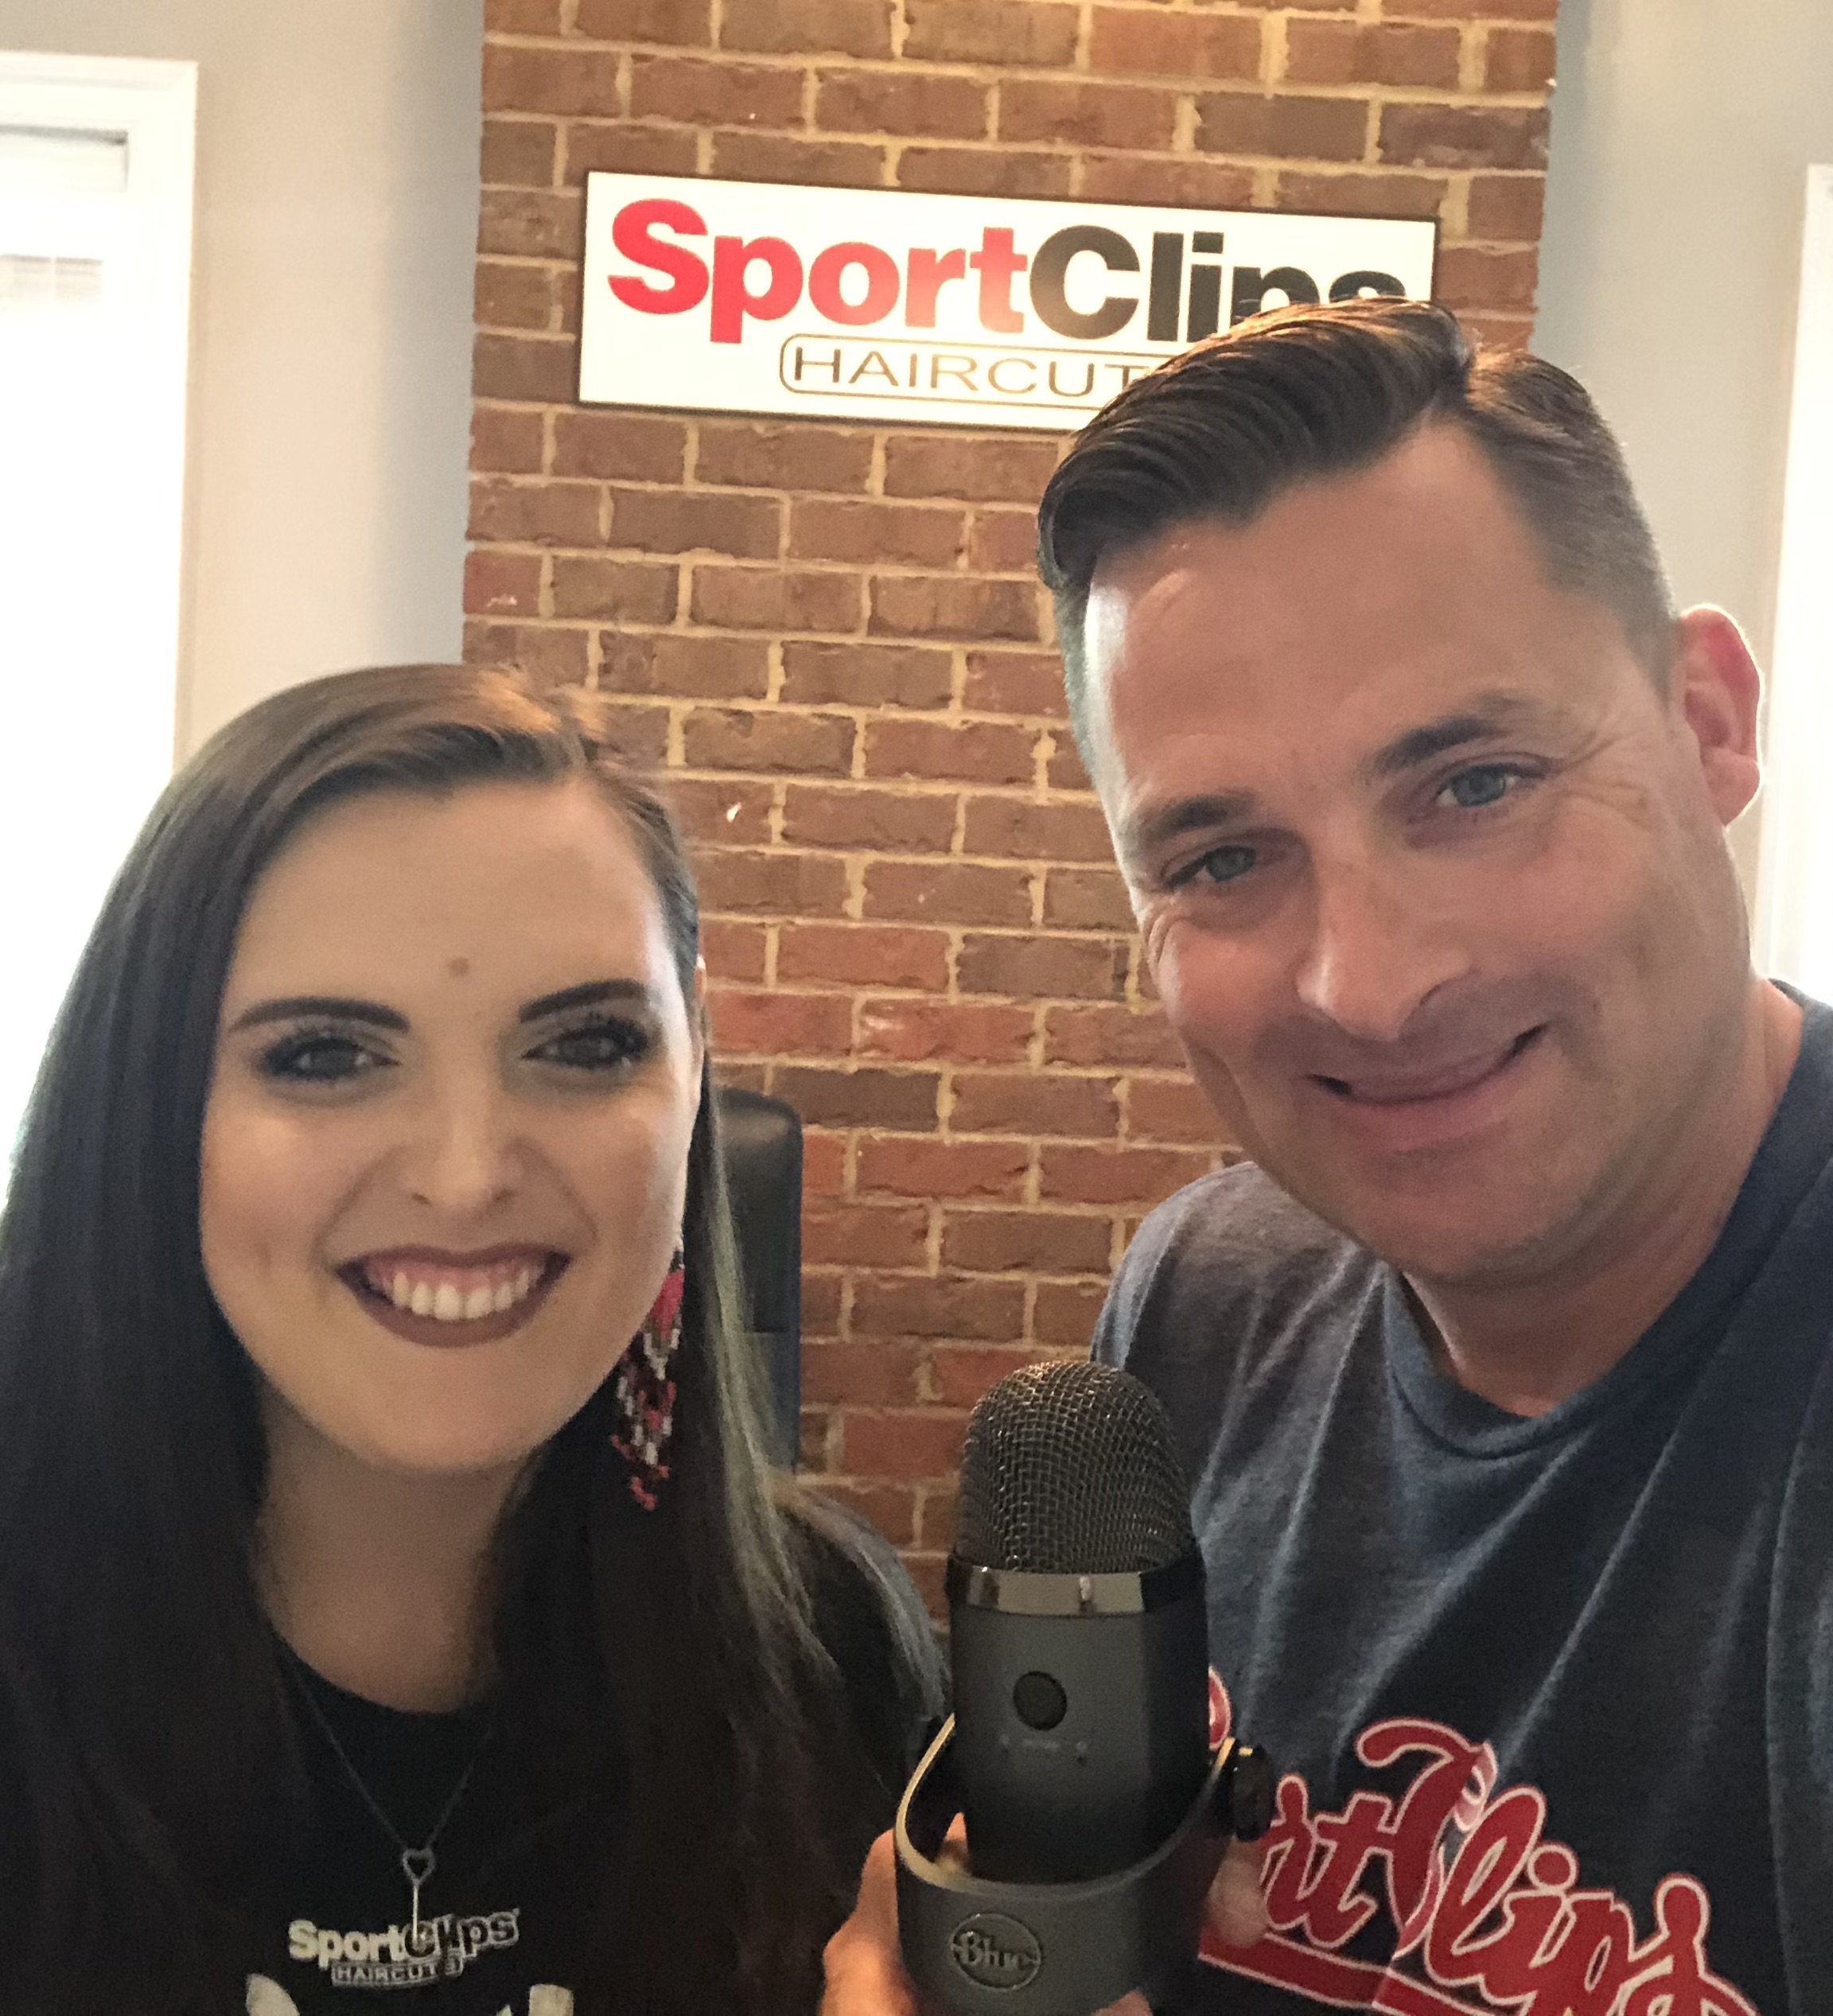 Chad Jordan and Katie Hackney holding a microphone in front of a Sport Clips sign